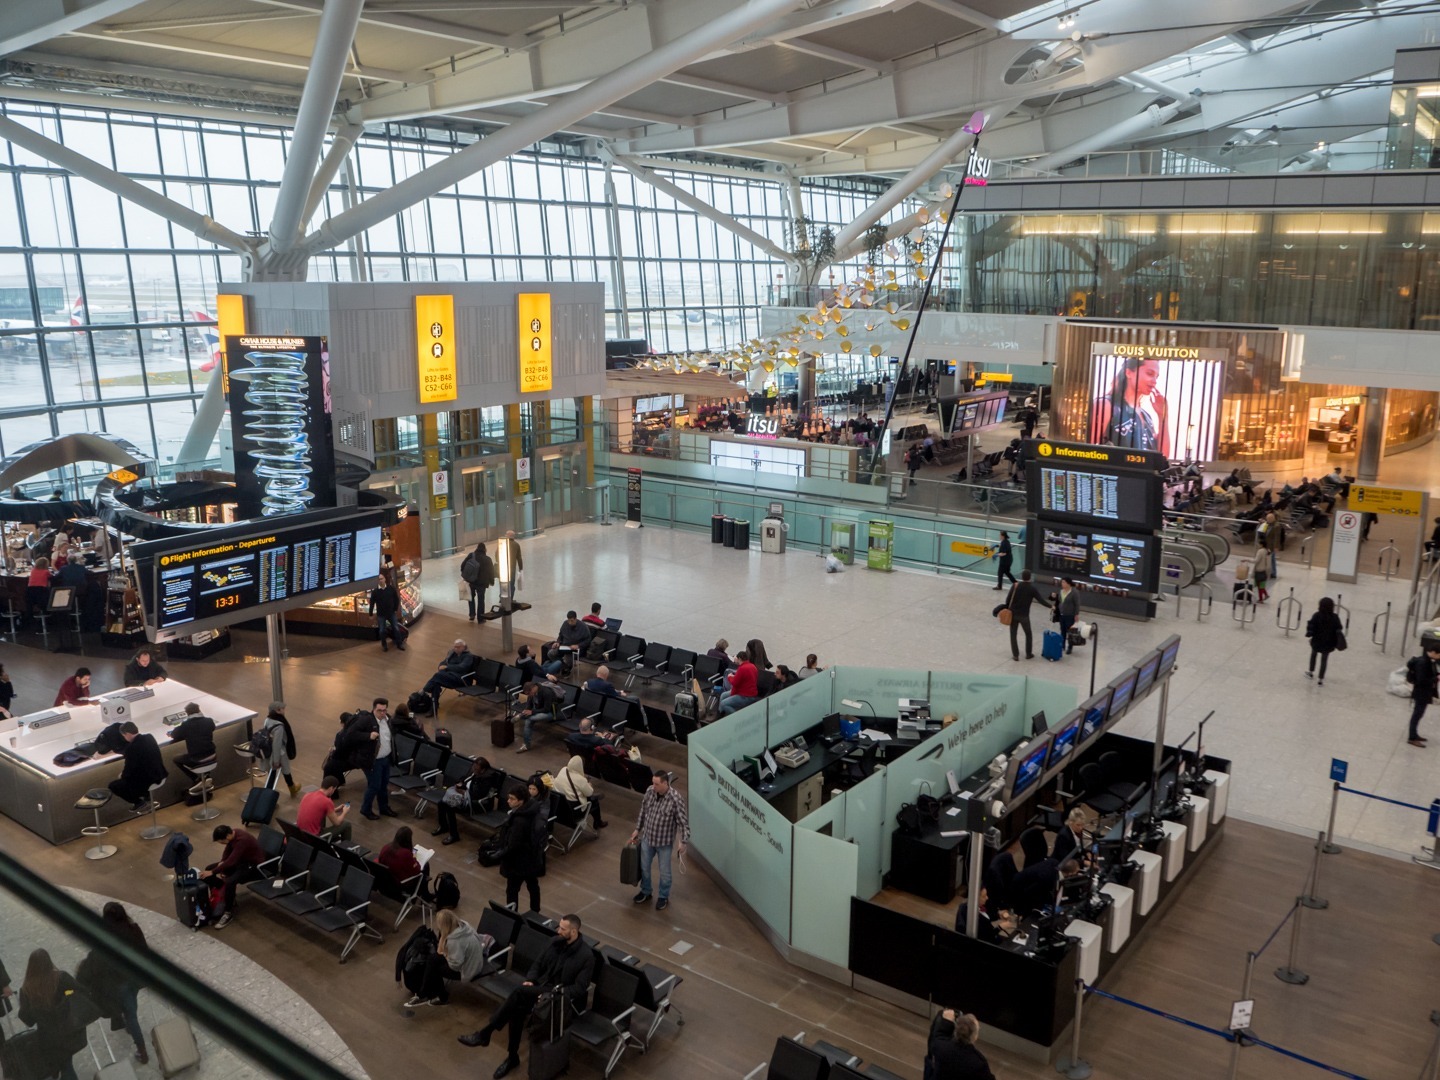 London Heathrow Airport Guide: 10 Things to Know Before Visiting